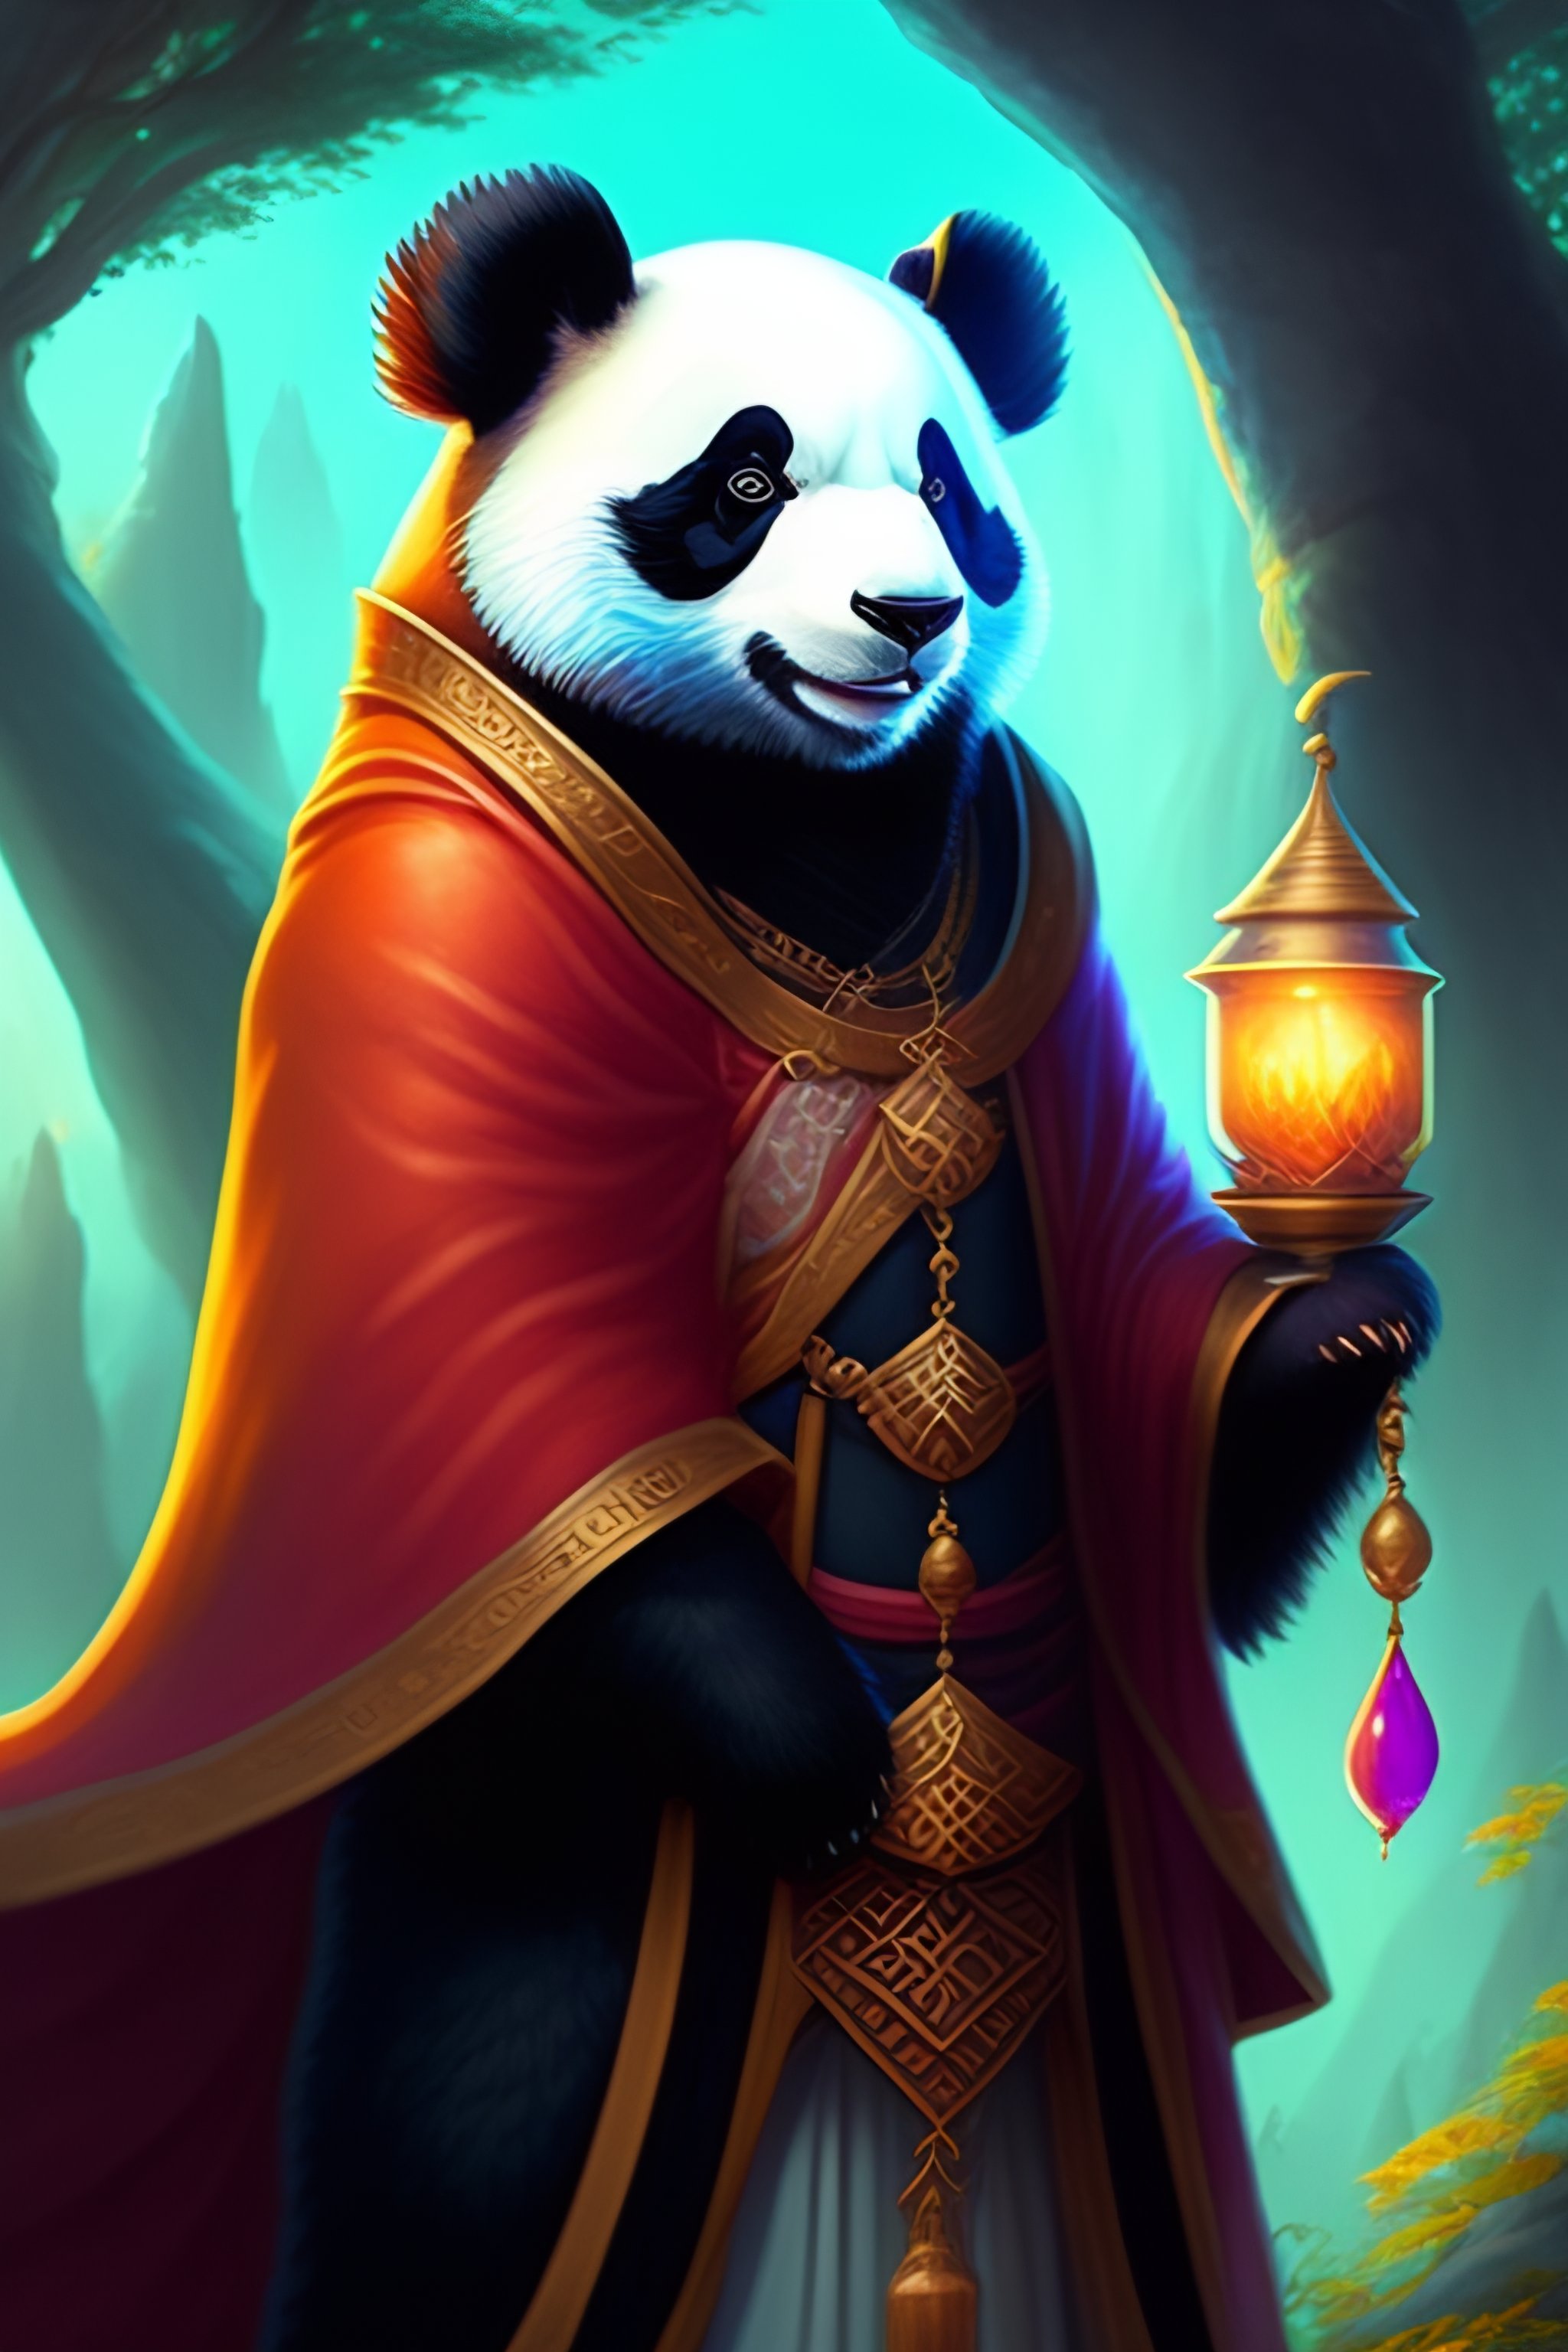 Lexica - A portrait an anthropomorphic panda mage casting a spell ...